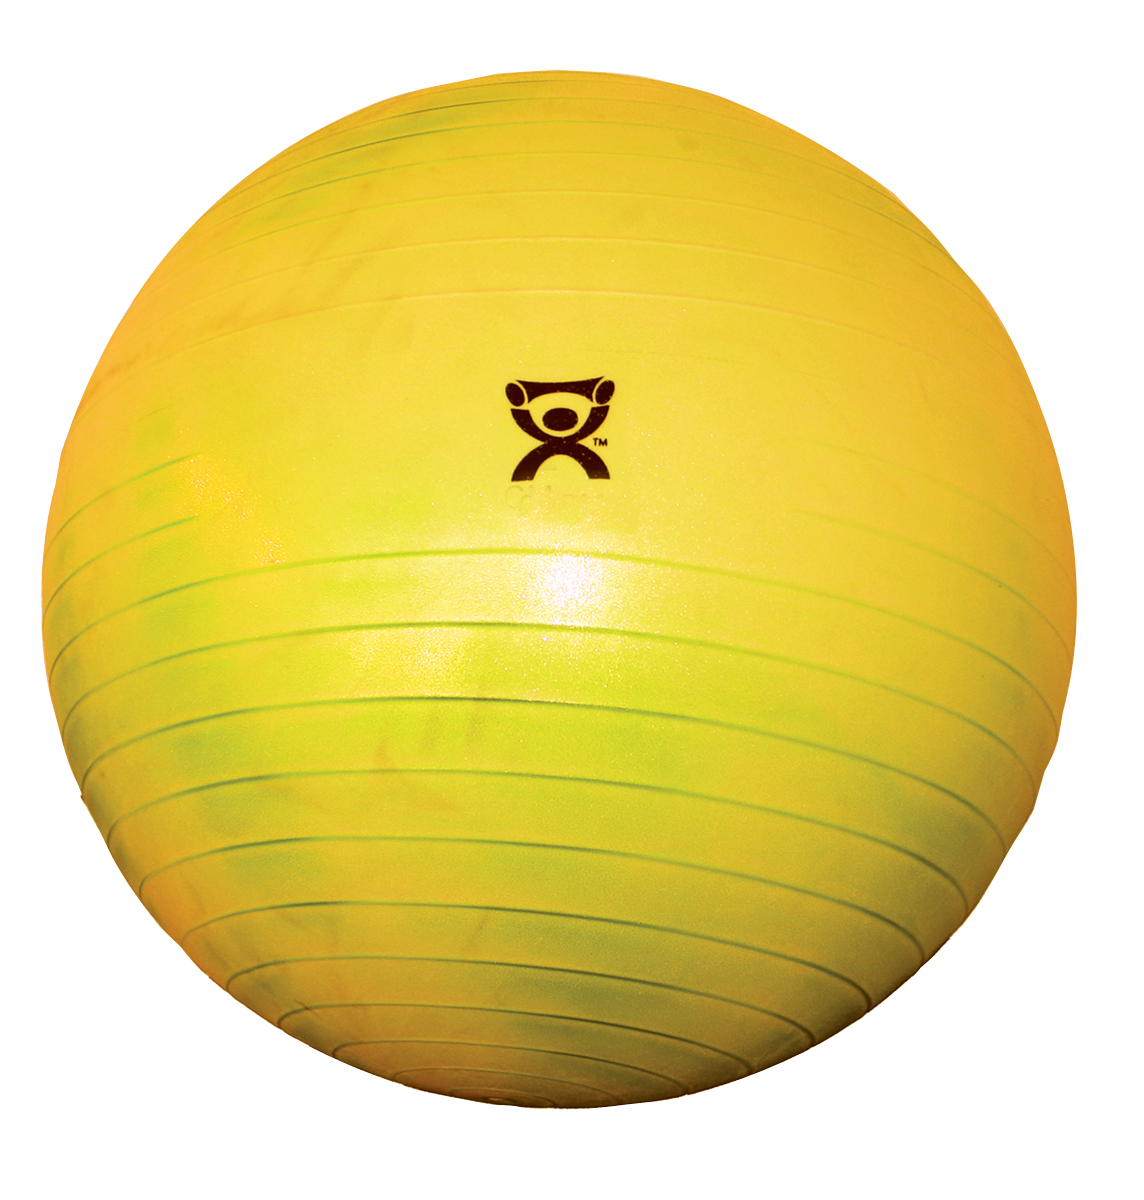 Exercise Balls and Accessories